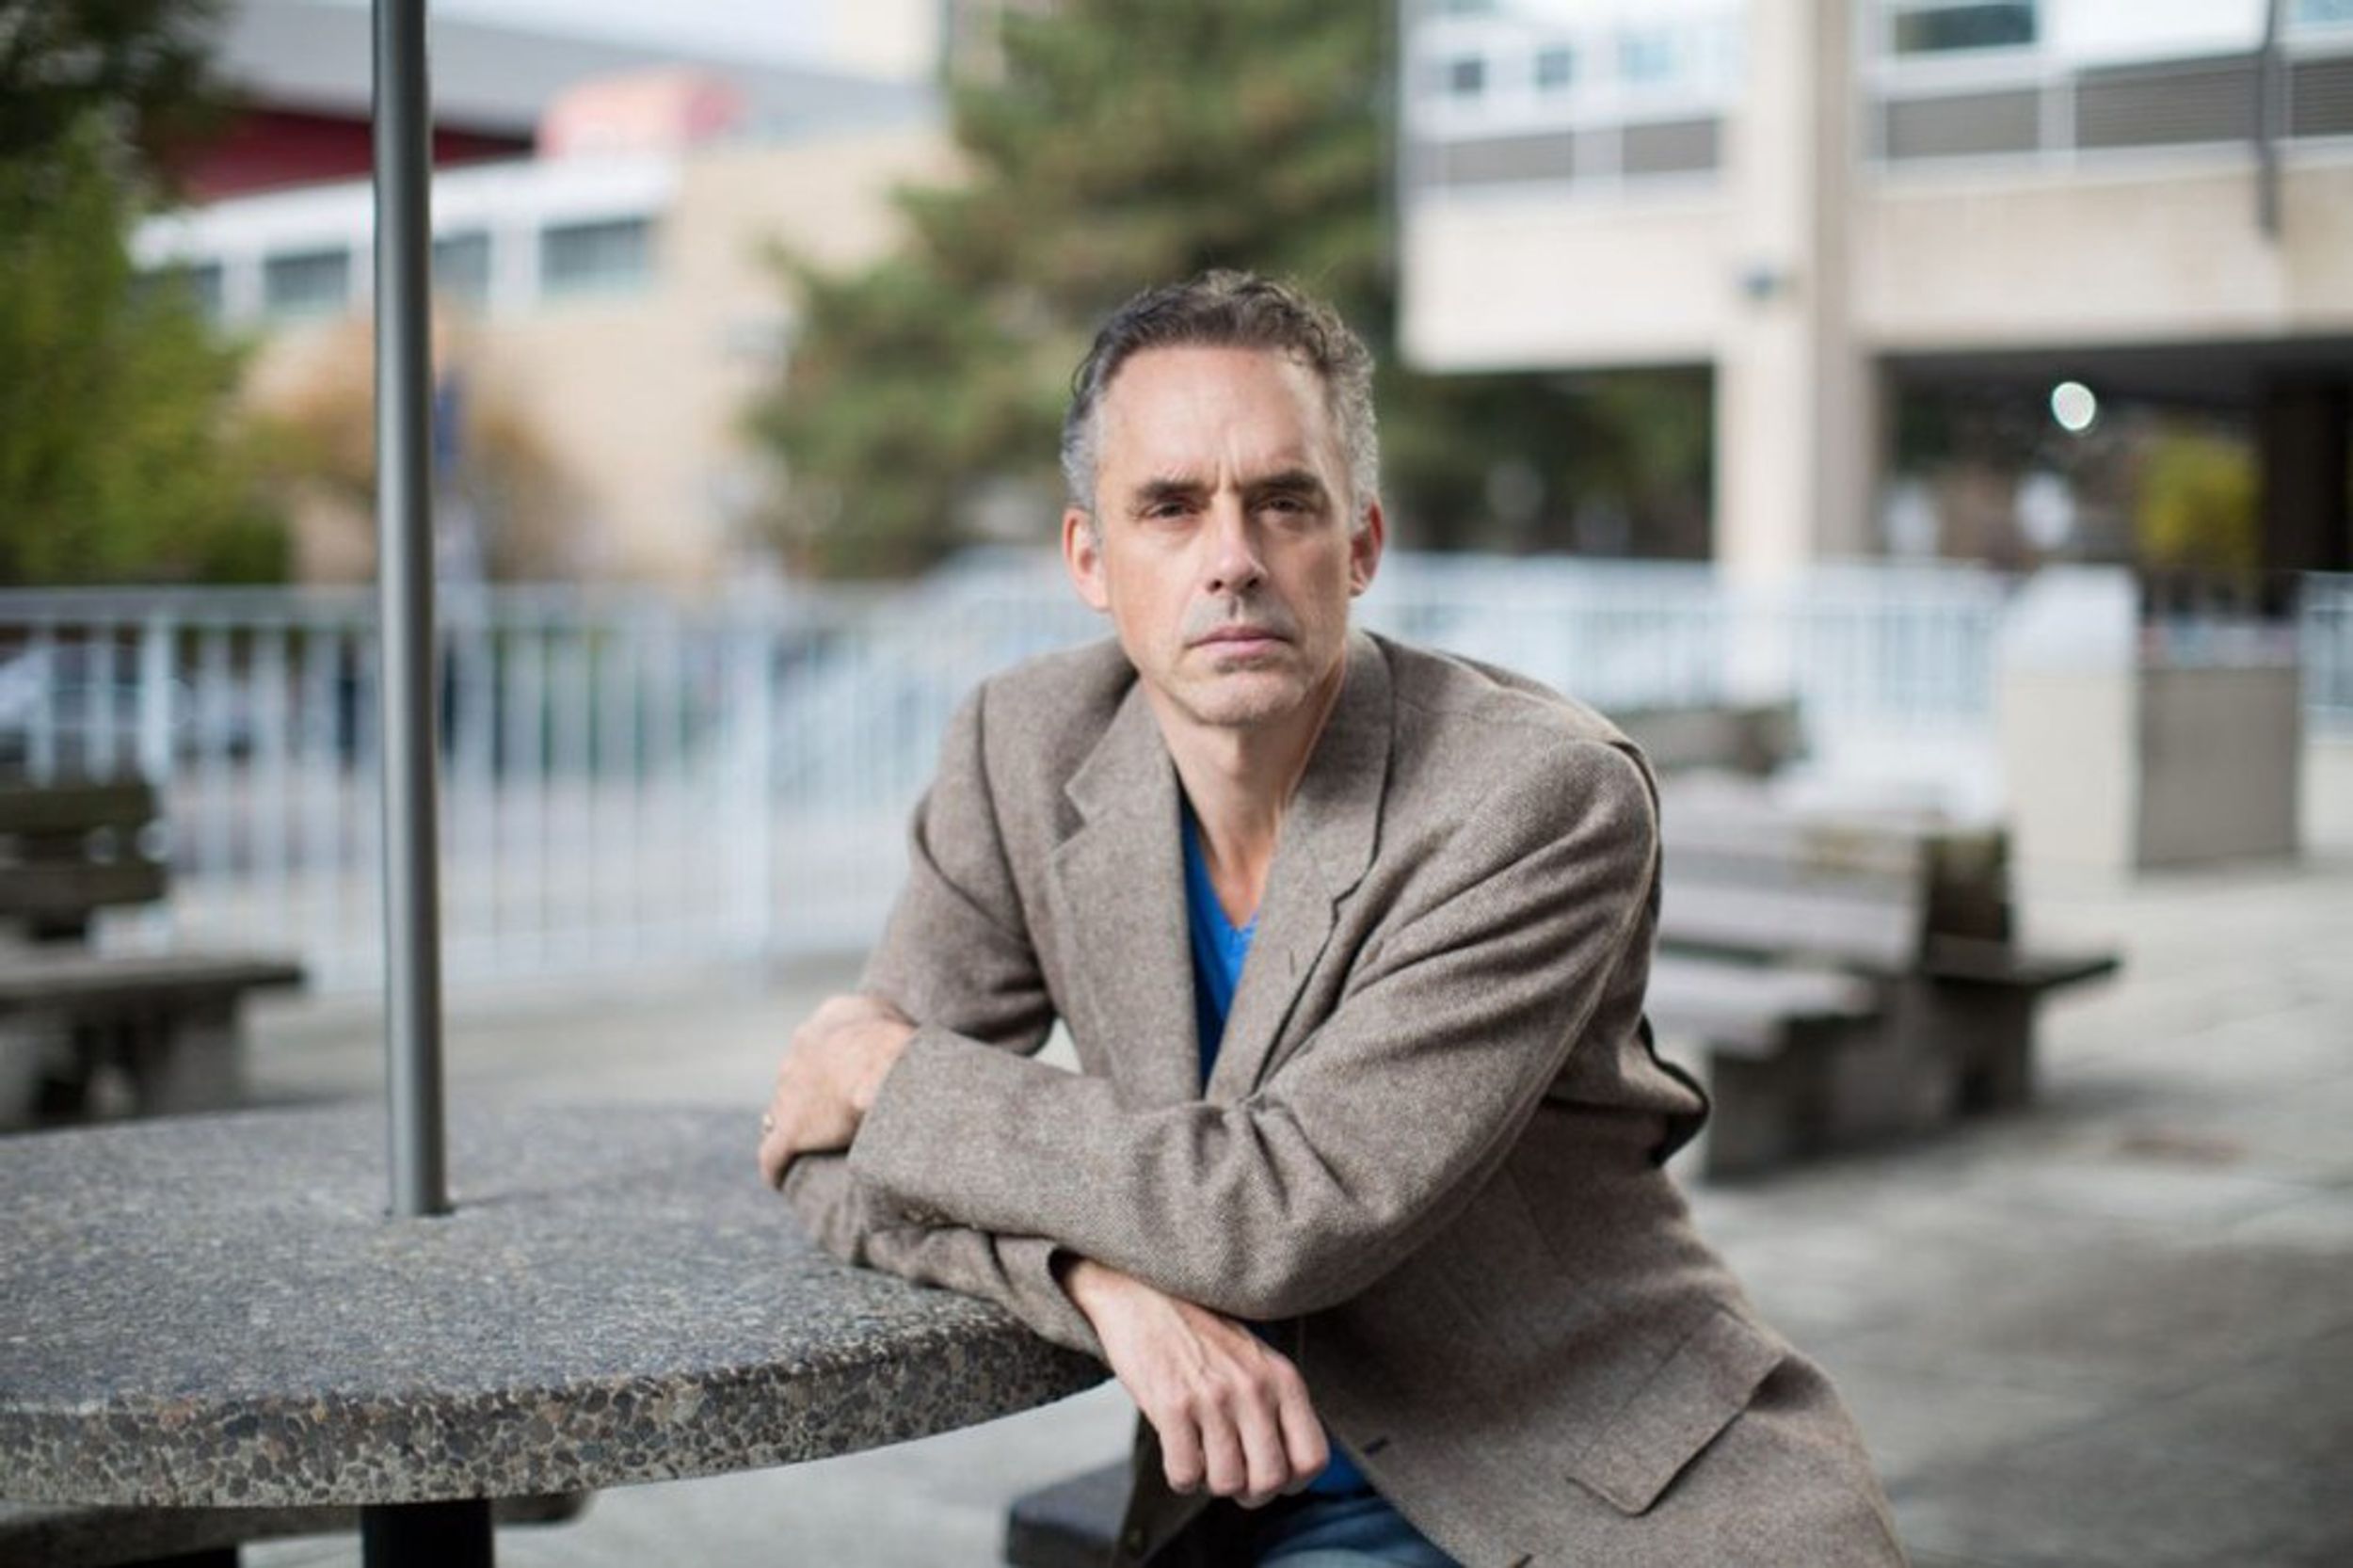 A Brief Commentary On The Jordan Peterson Controversy